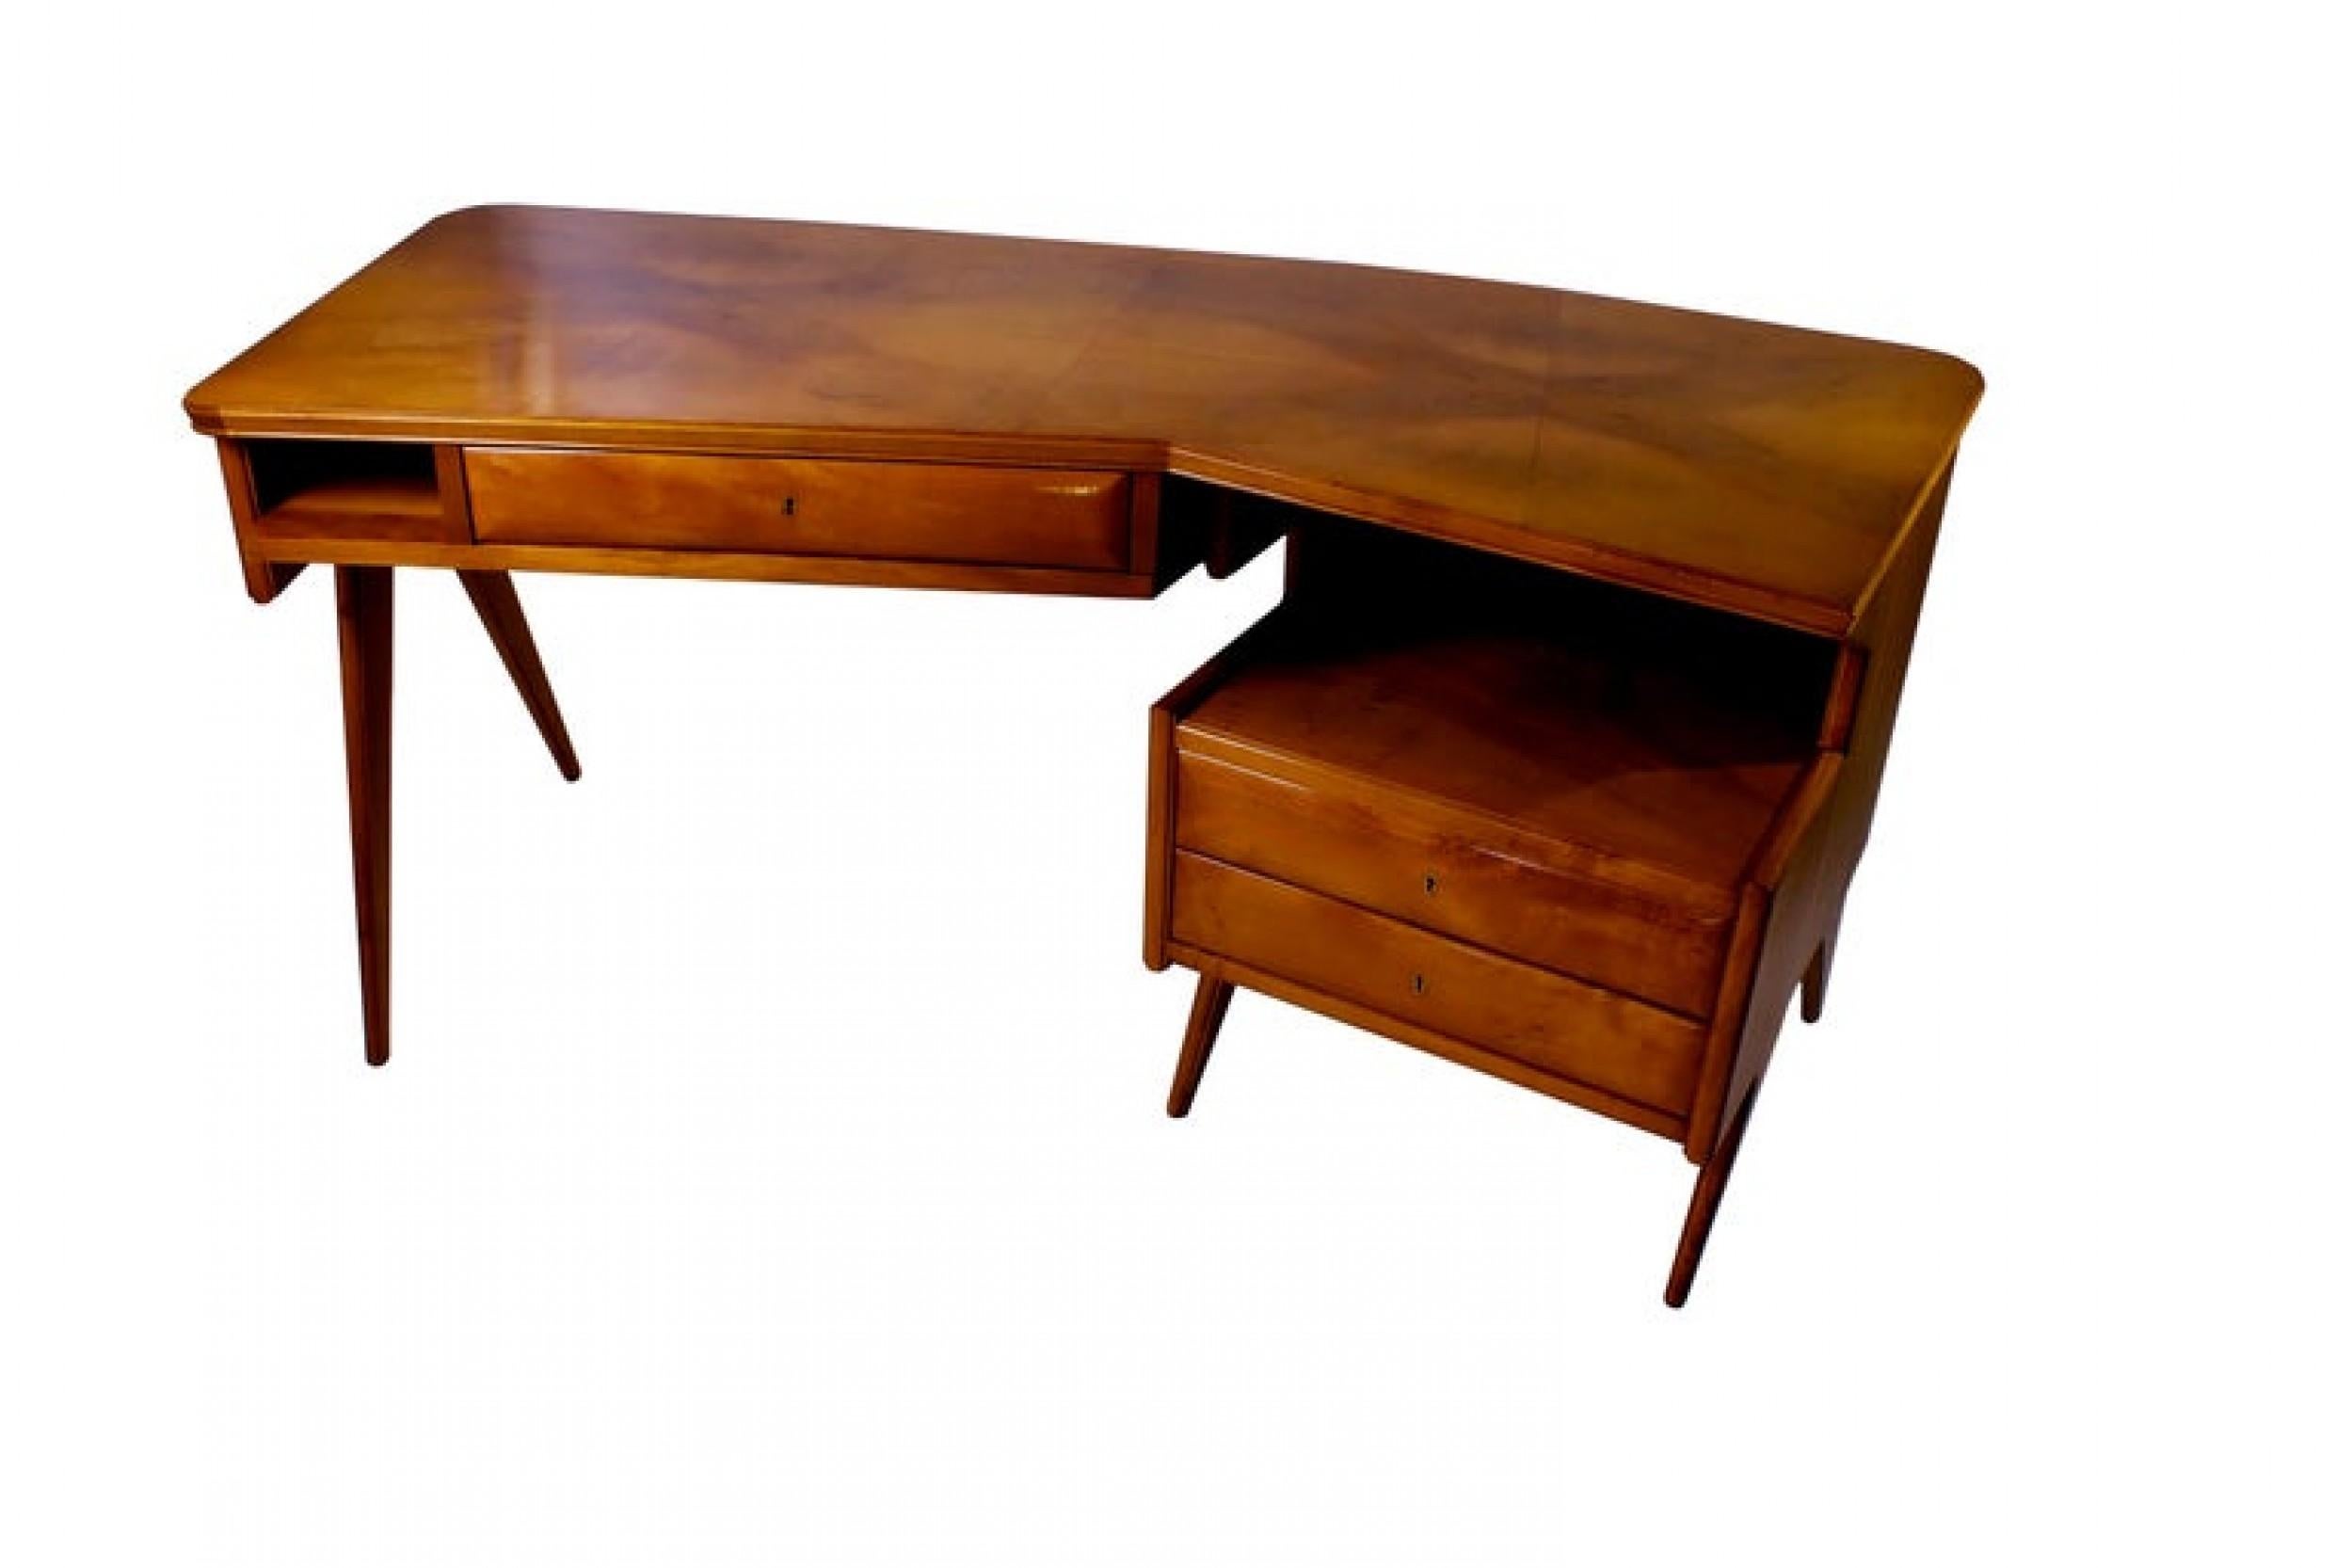 20th Century Italian Modern Walnut and Rootwood Desk, Attributed to Gio Ponti For Sale